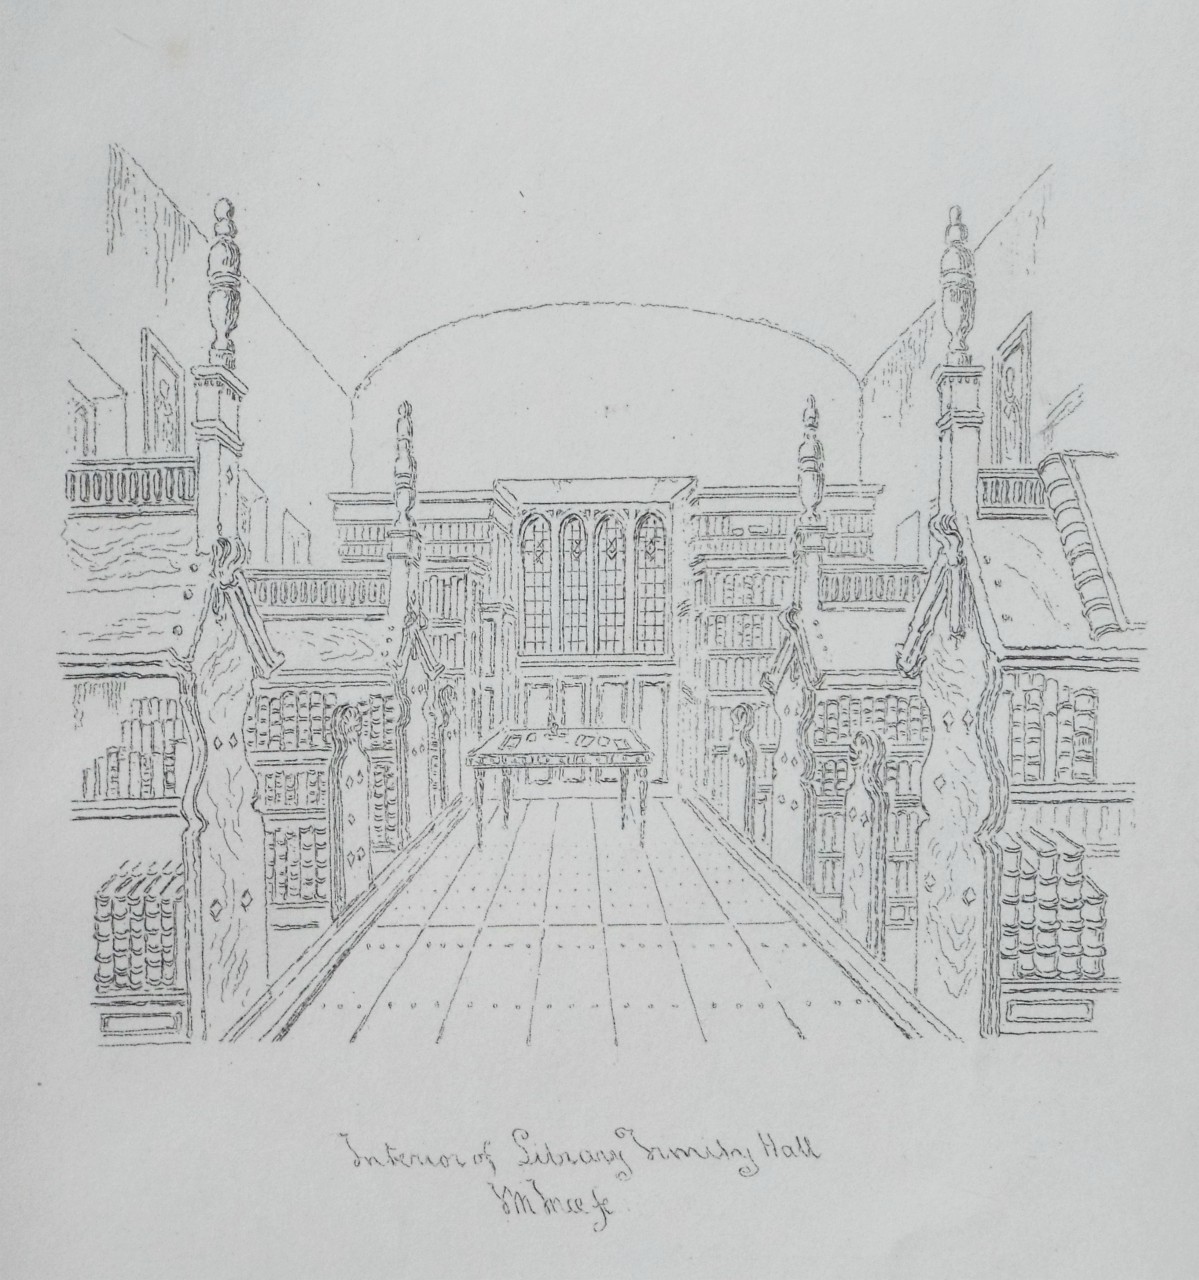 Etching - Interior of Library Trinity Hall - Ince